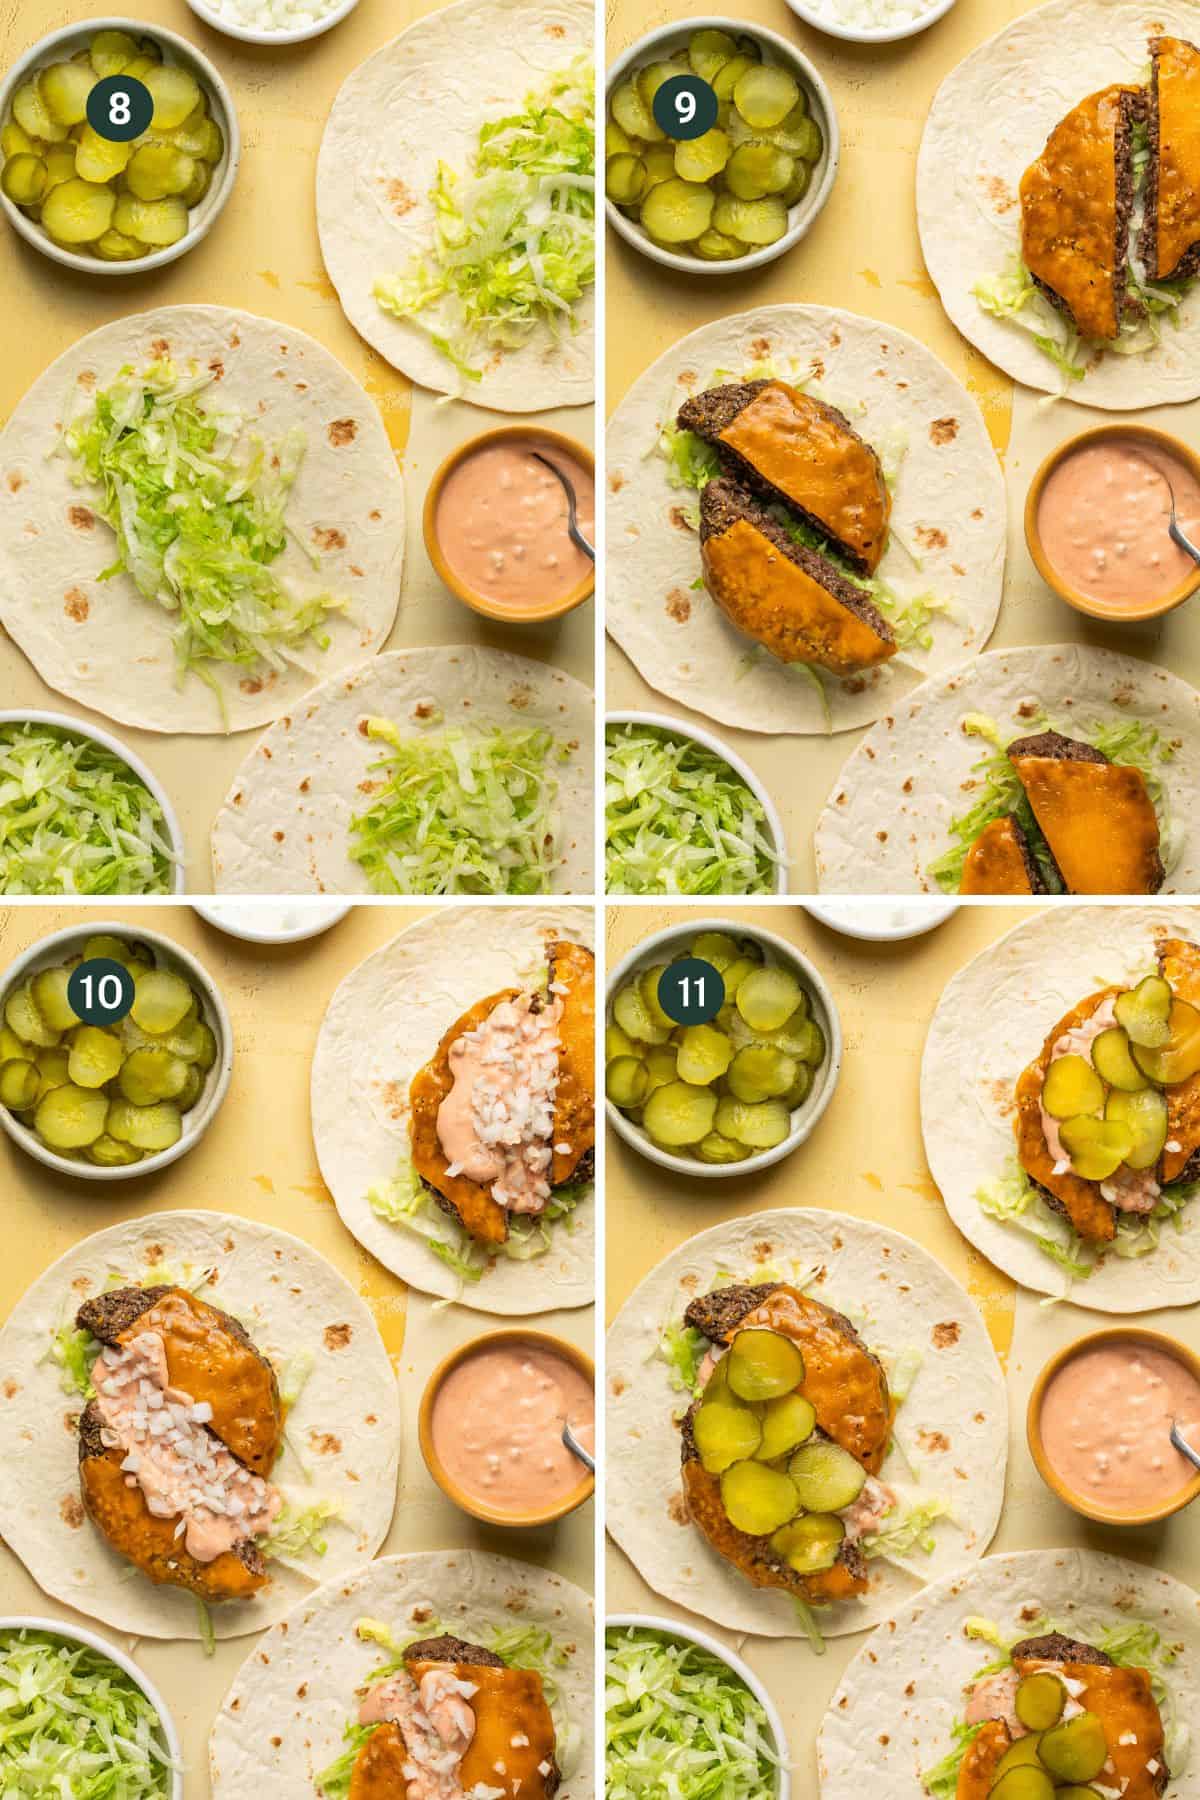 Step by step images showing how to top the tortilla with lettuce, then one burger cut in half, big mac sauce, white onions and lastly dill pickles. 